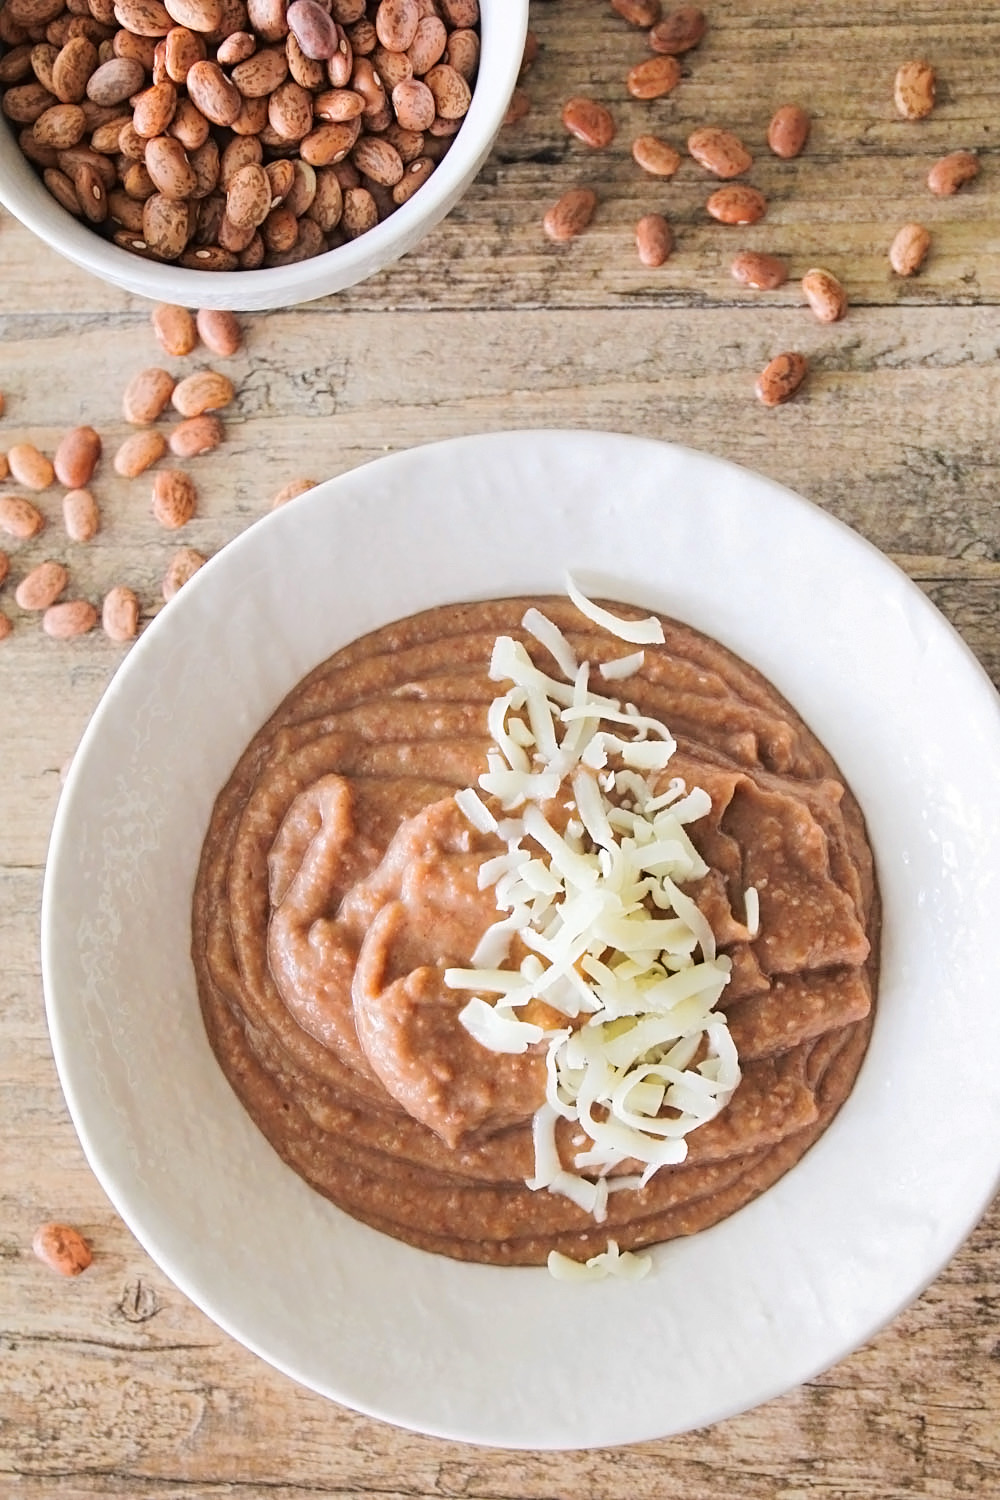 These delicious Instant Pot pinto beans are so easy to make, and make amazing refried beans too!